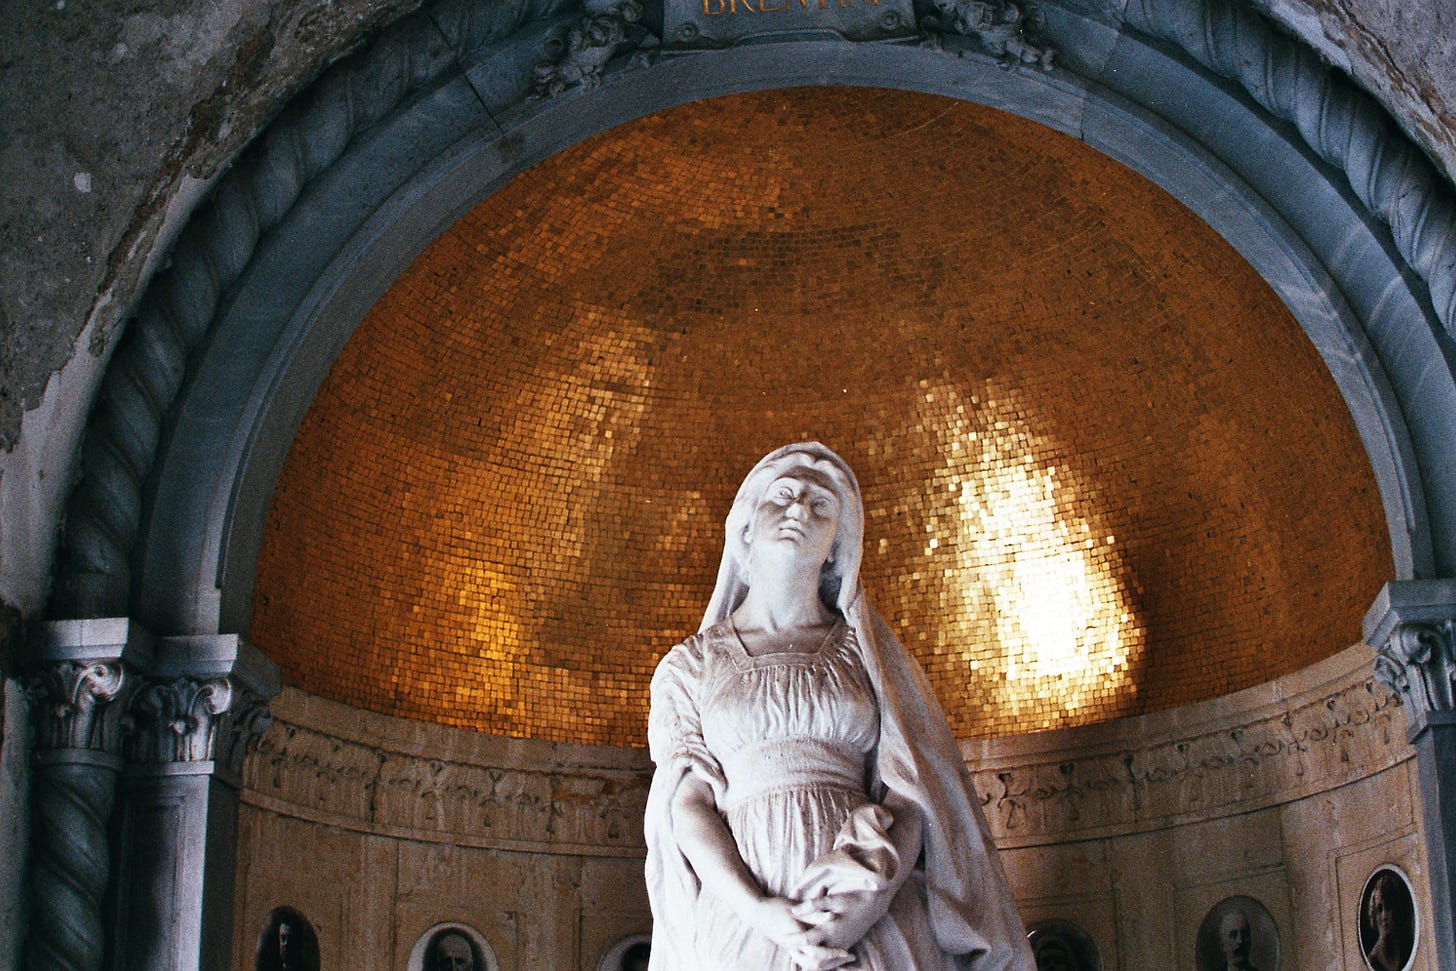 A statue of the Madonna sits inside a niche in the wall, with golden reflective tiles behind her head and shoulders.